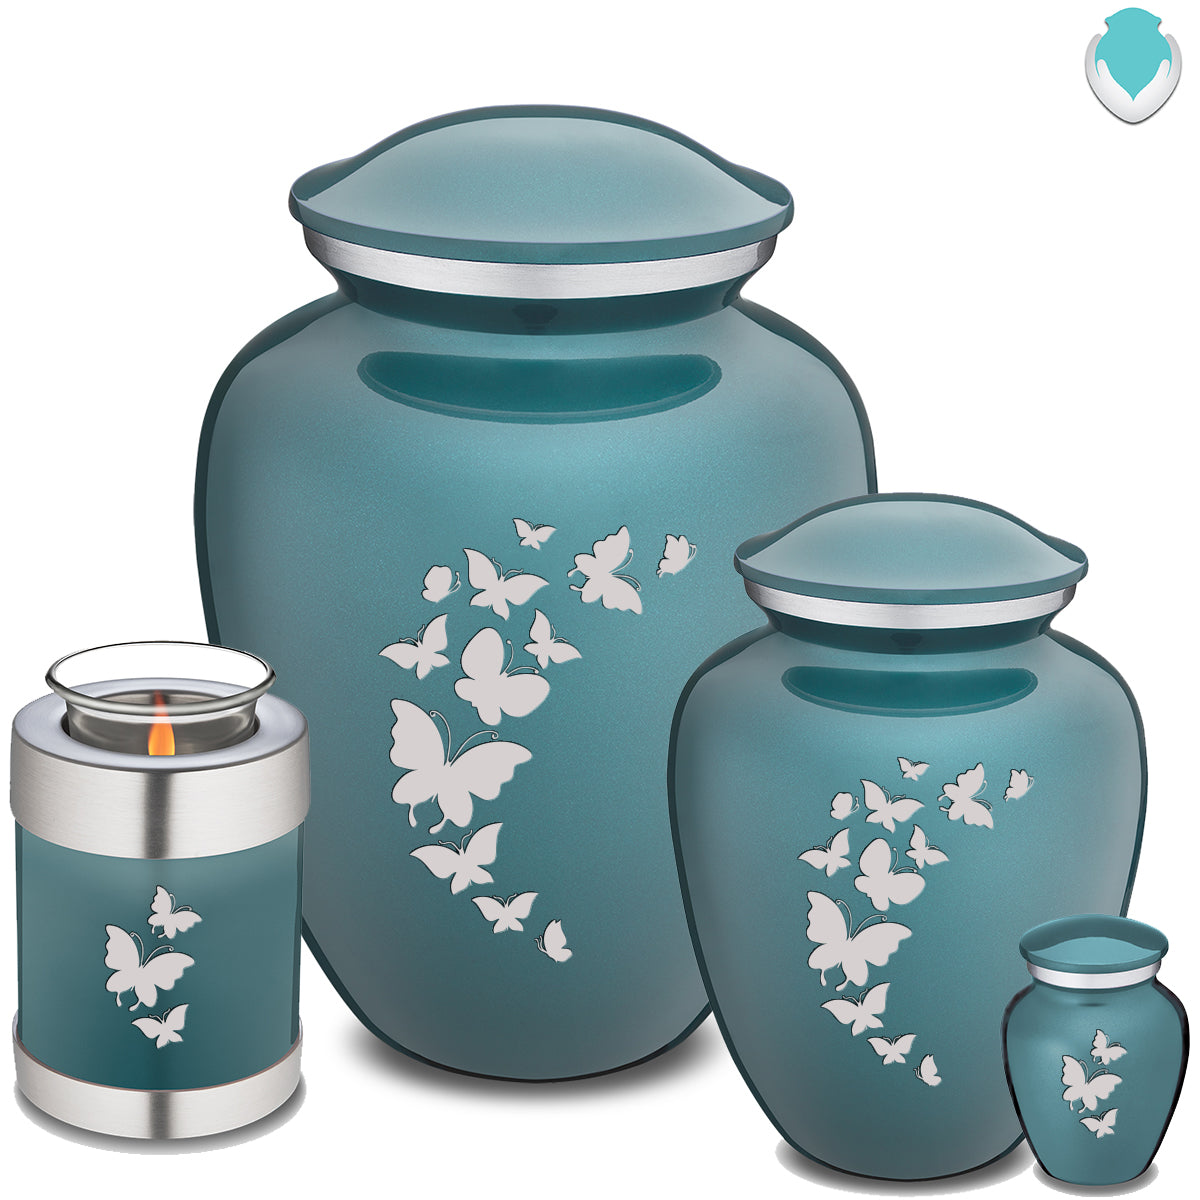 Medium Embrace Teal Butterfly Cremation Urn